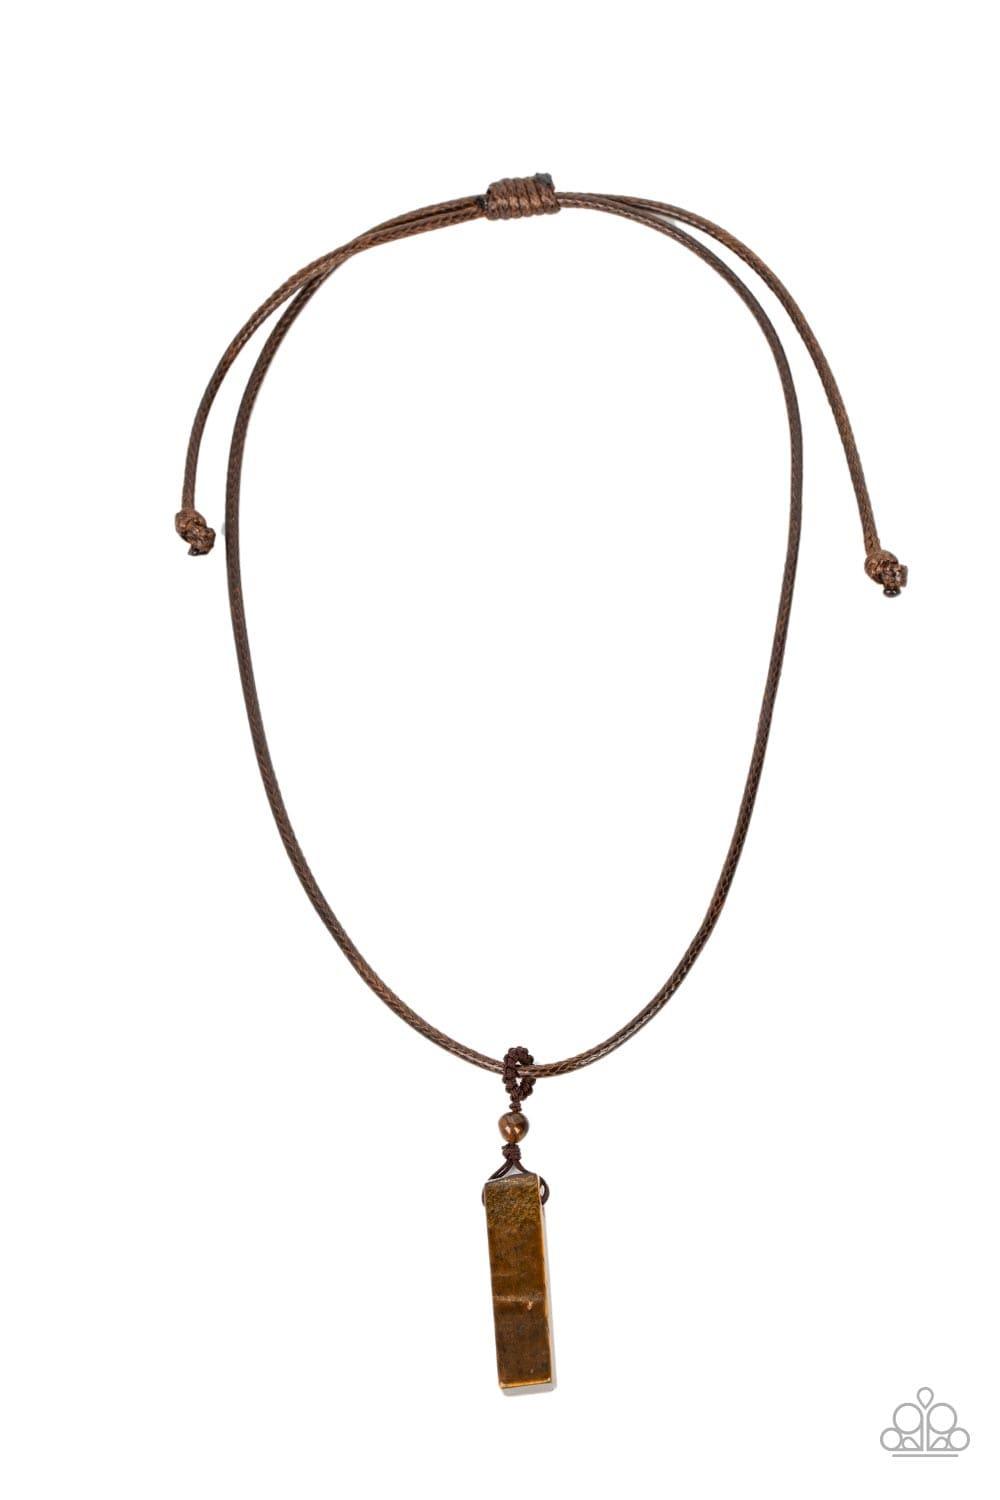 Paparazzi Accessories - Comes Back Zen-fold - Brown Necklace - Bling by JessieK